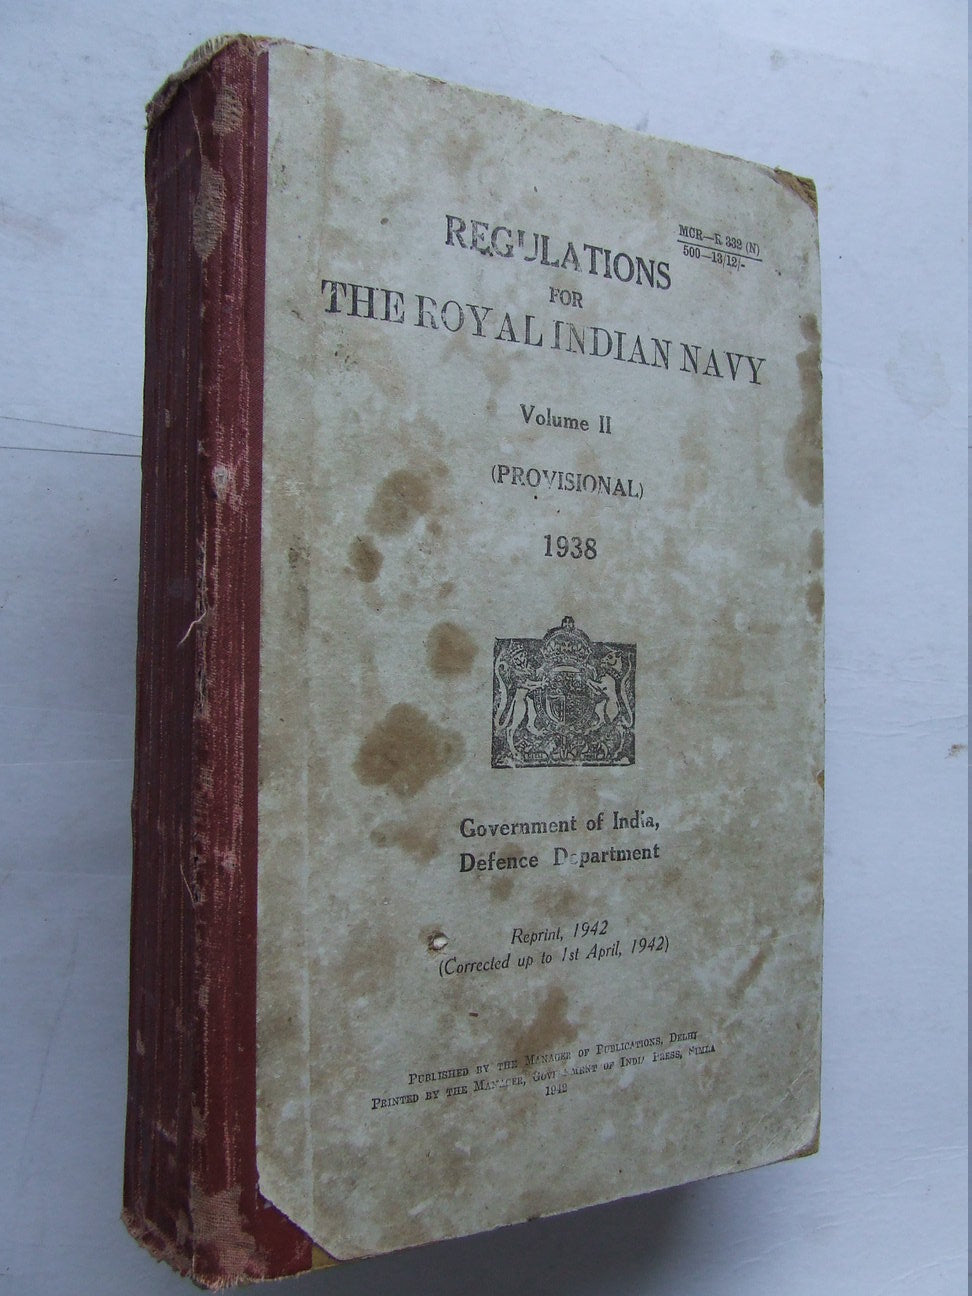 Regulations for the Royal Indian Navy.  volume II (provisional) 1938